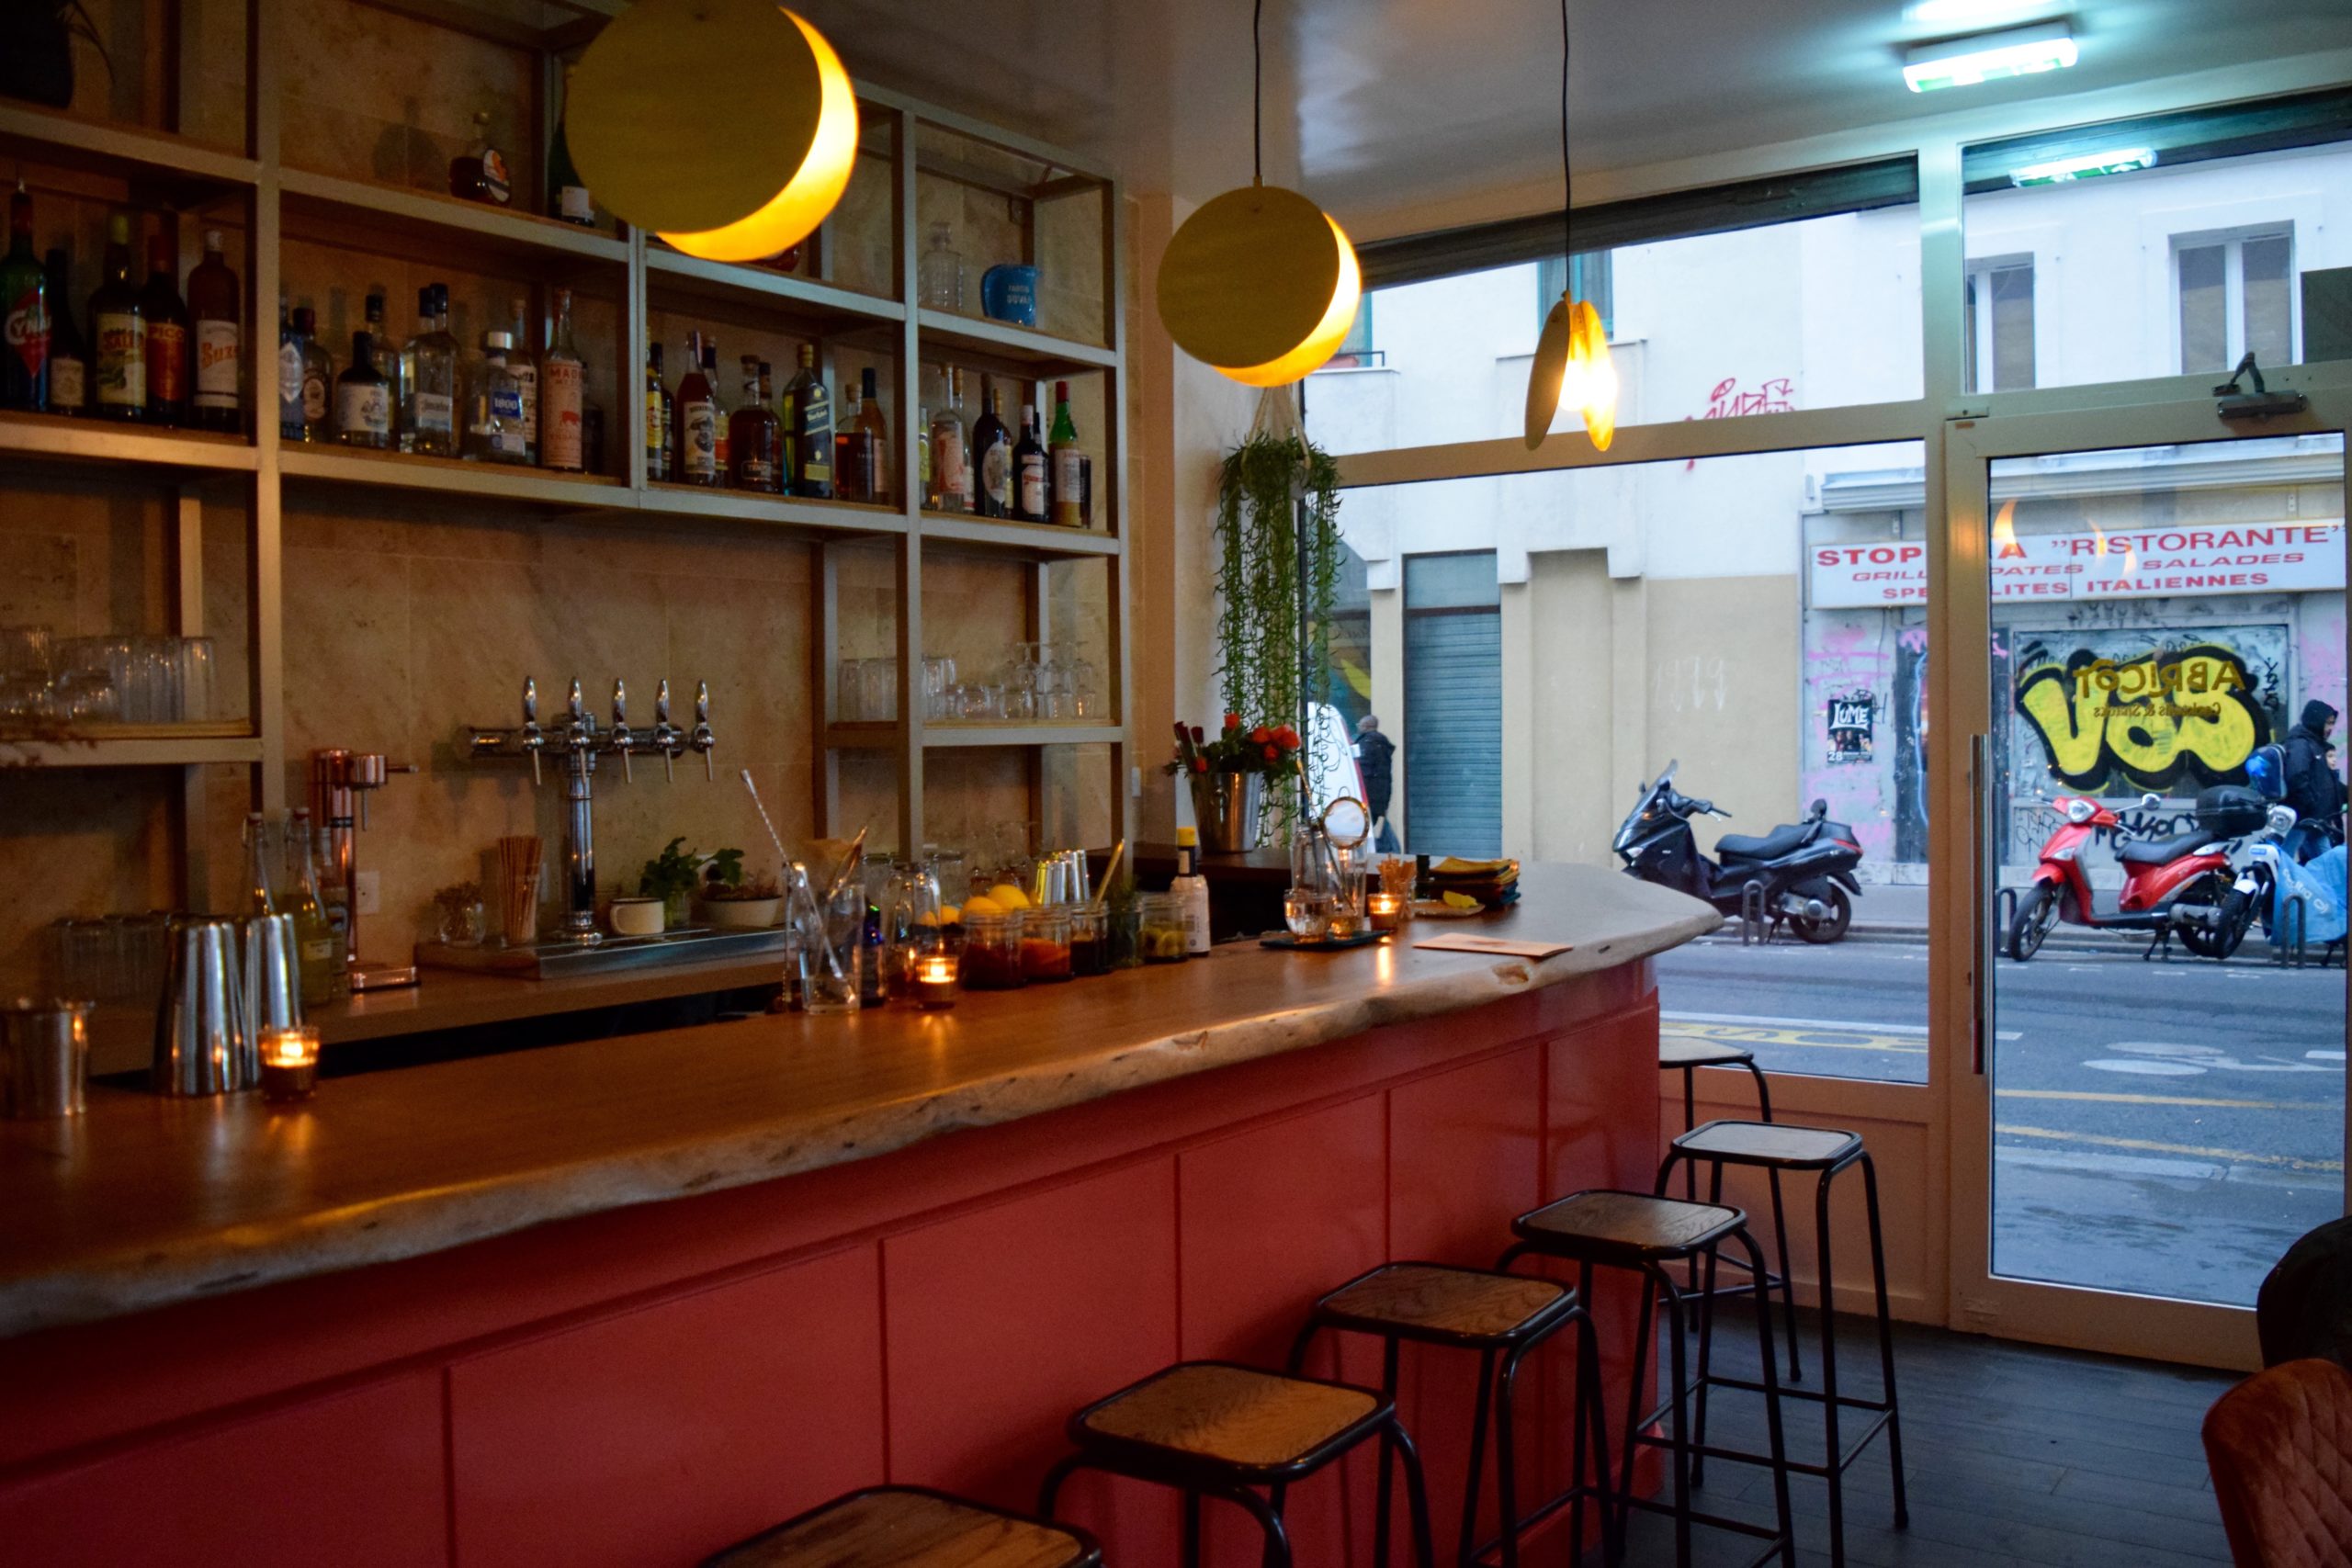 Abricot bar keeps it cheeky with creative cocktails and vegetarian snacks -  Paris • Cocktails • Bars